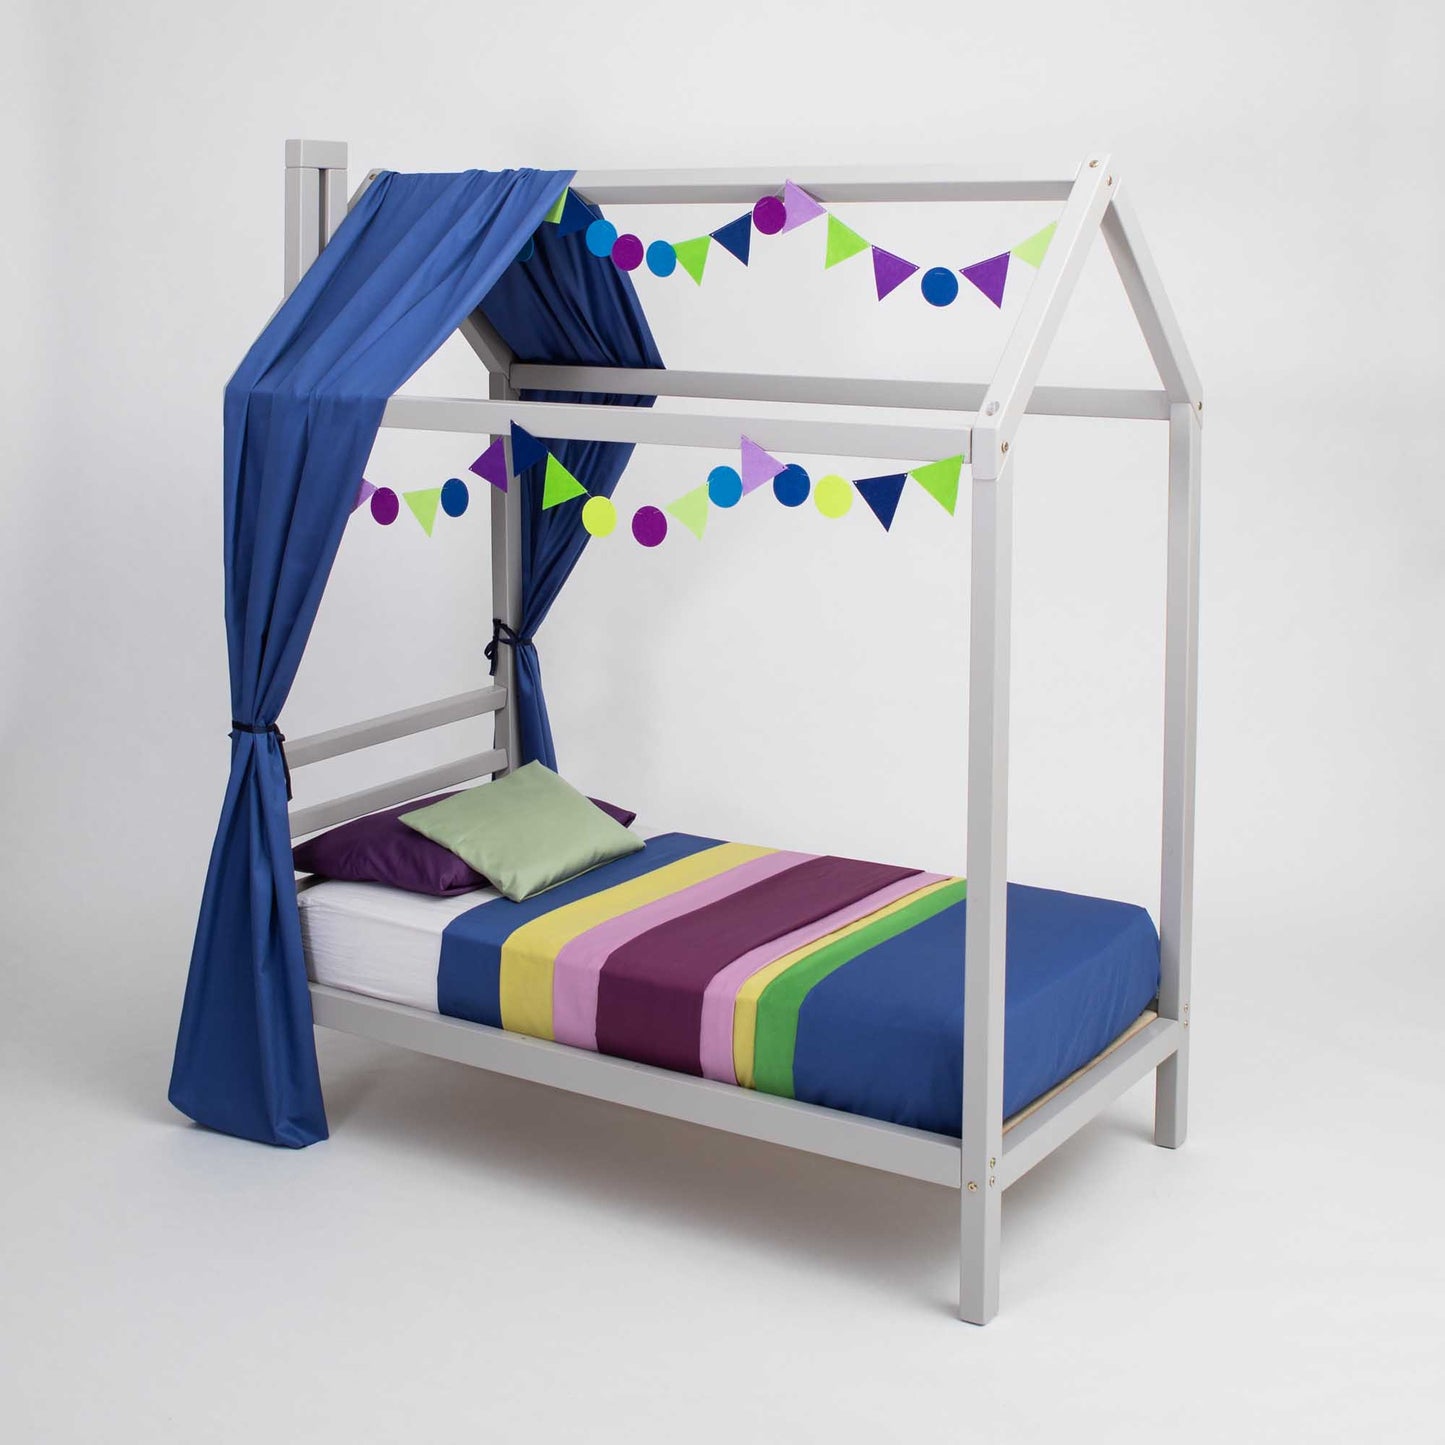 A child's Kids' house bed on legs with a headboard with a canopy and bunting.